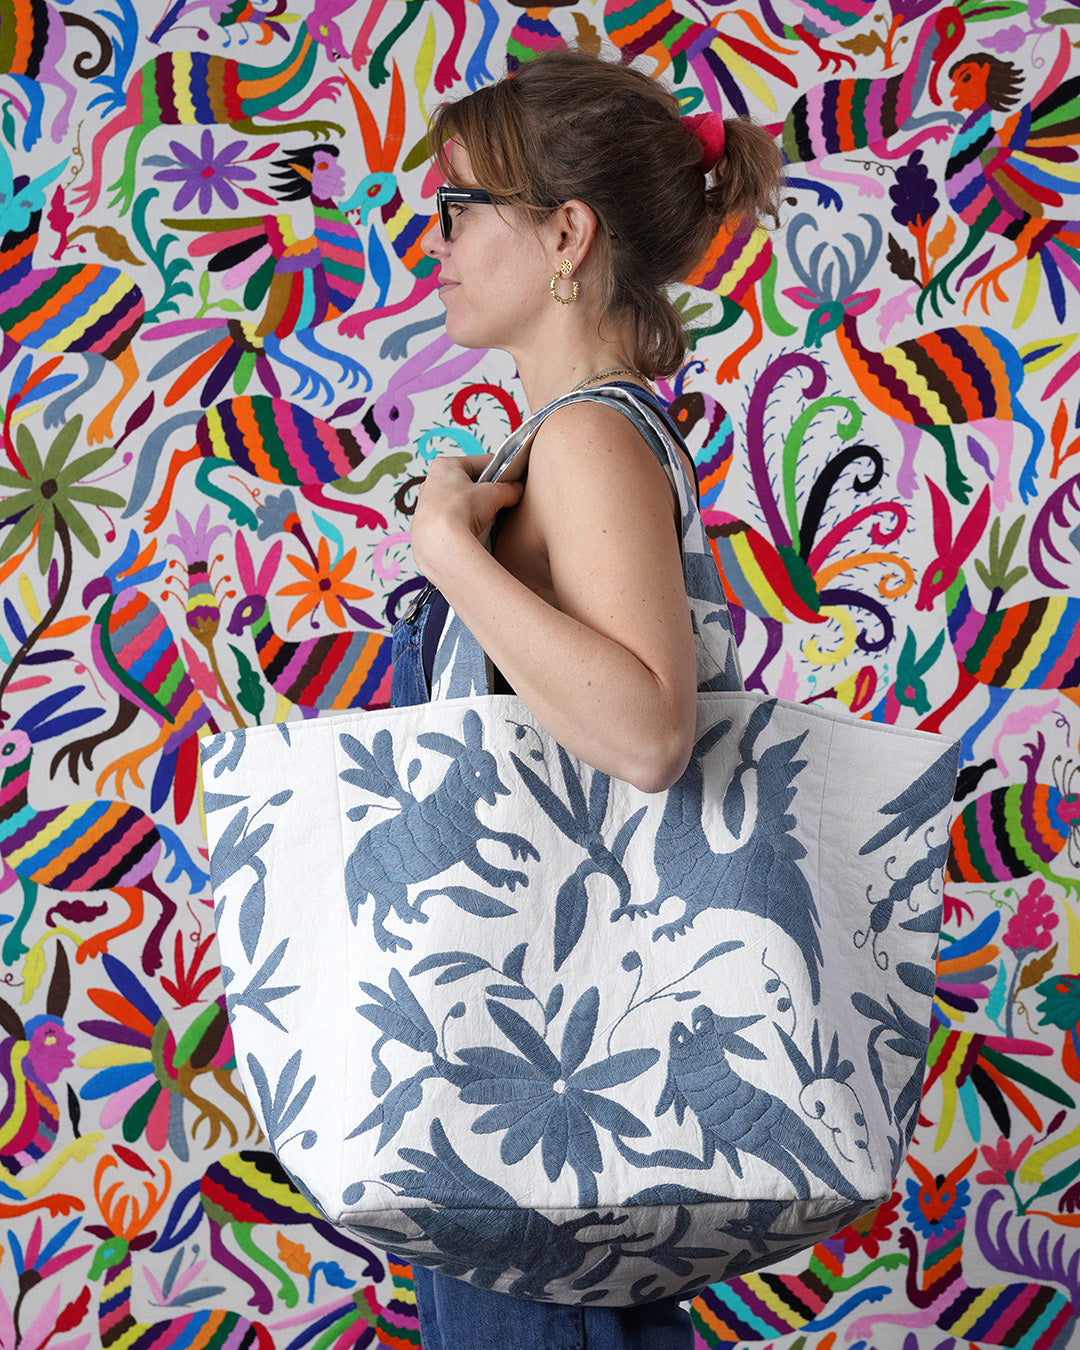 Off Cut Tote Bag - Grey Otomi, Hand Embroidered